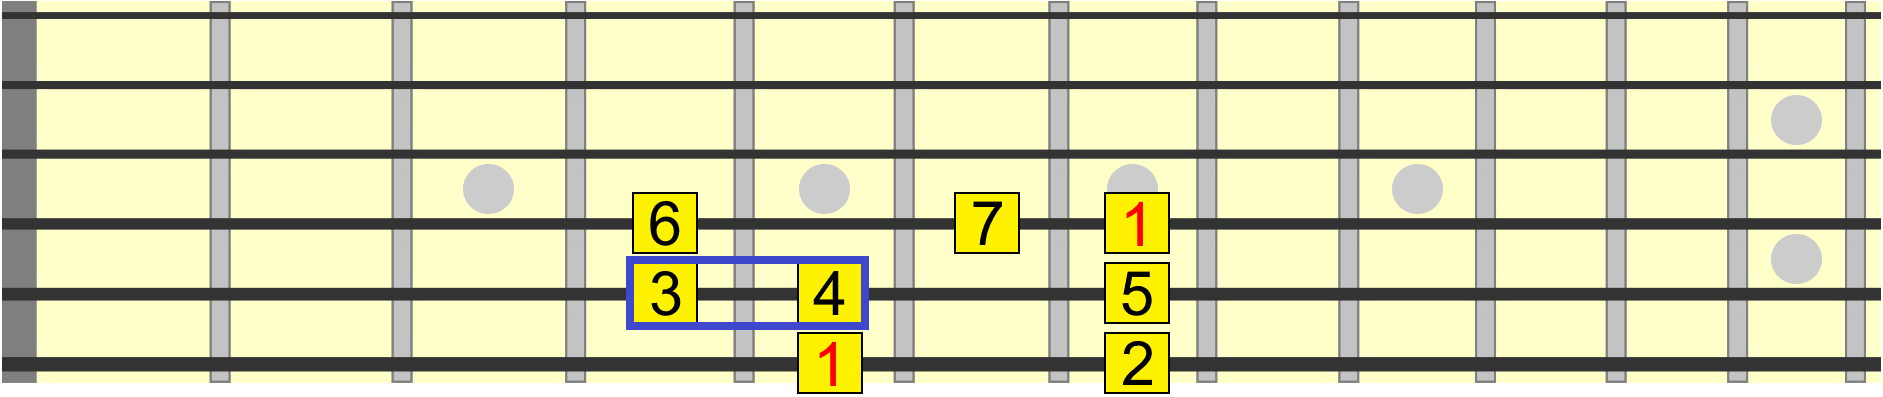 3rd and 4th intervals